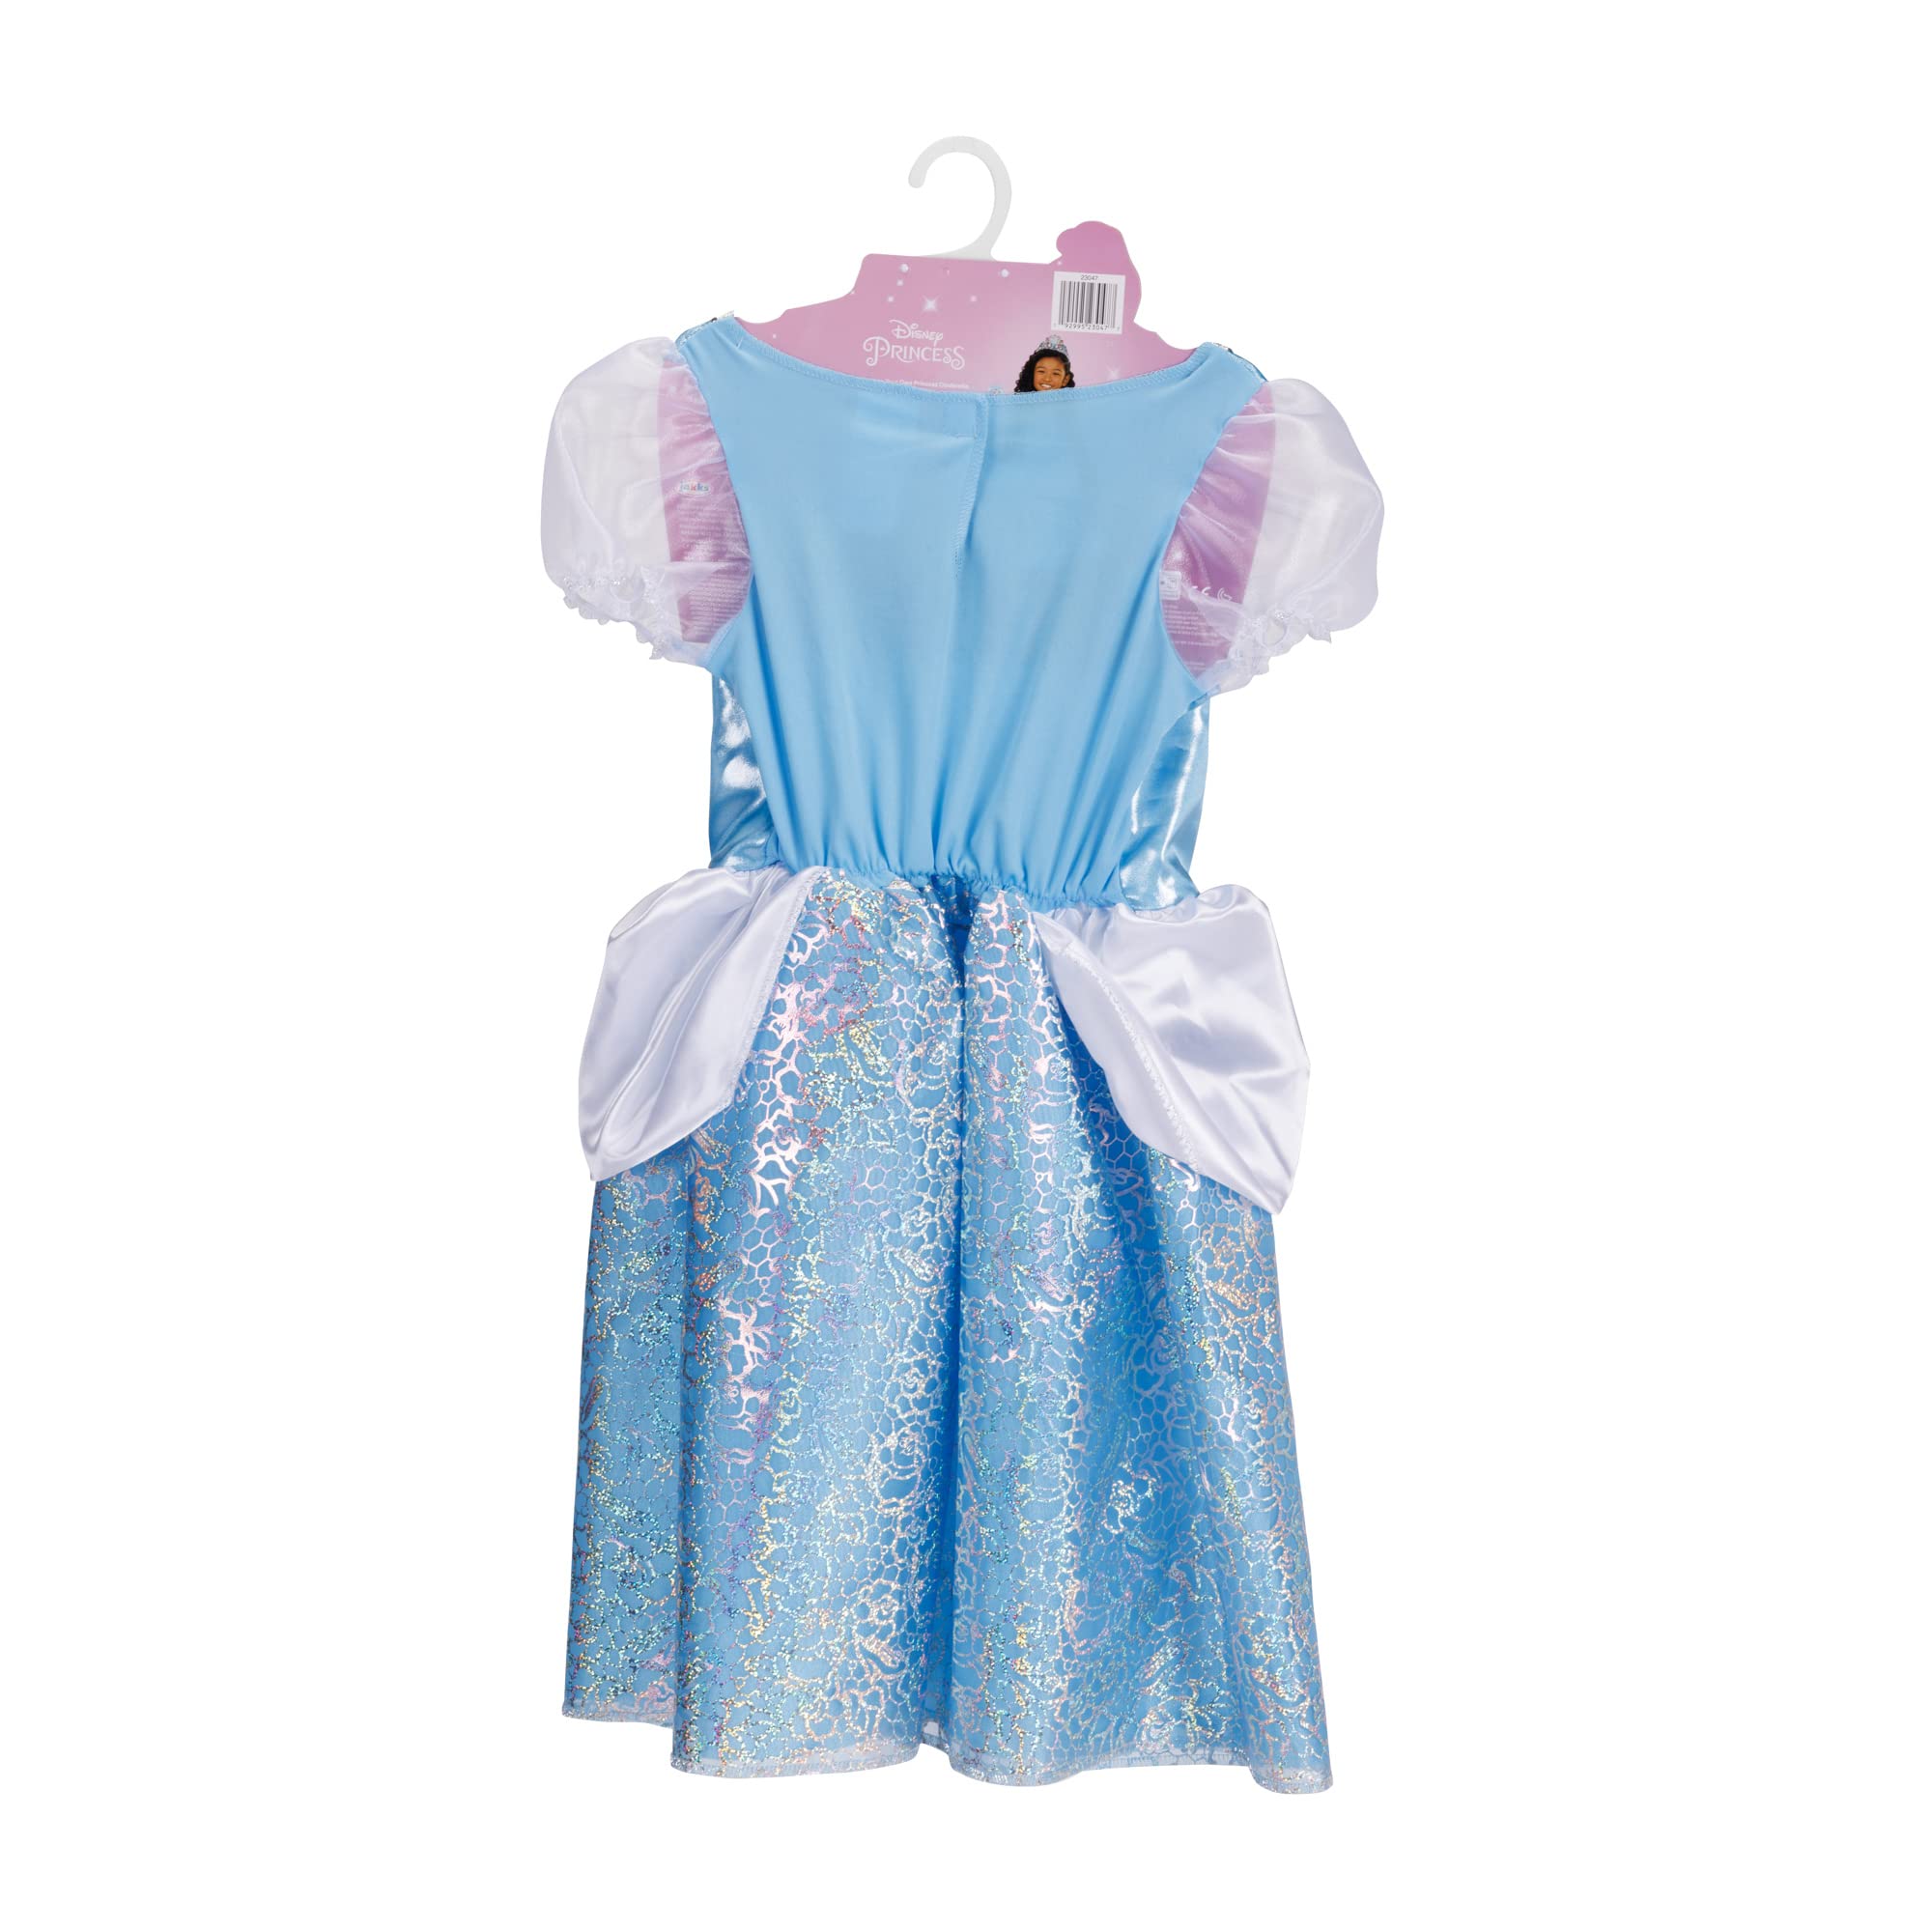 Disney Princess Disney 100 Cinderella Dress Costume for Girls, Perfect for Party, Halloween Or Pretend Play Dress Up Child Size 4-6X